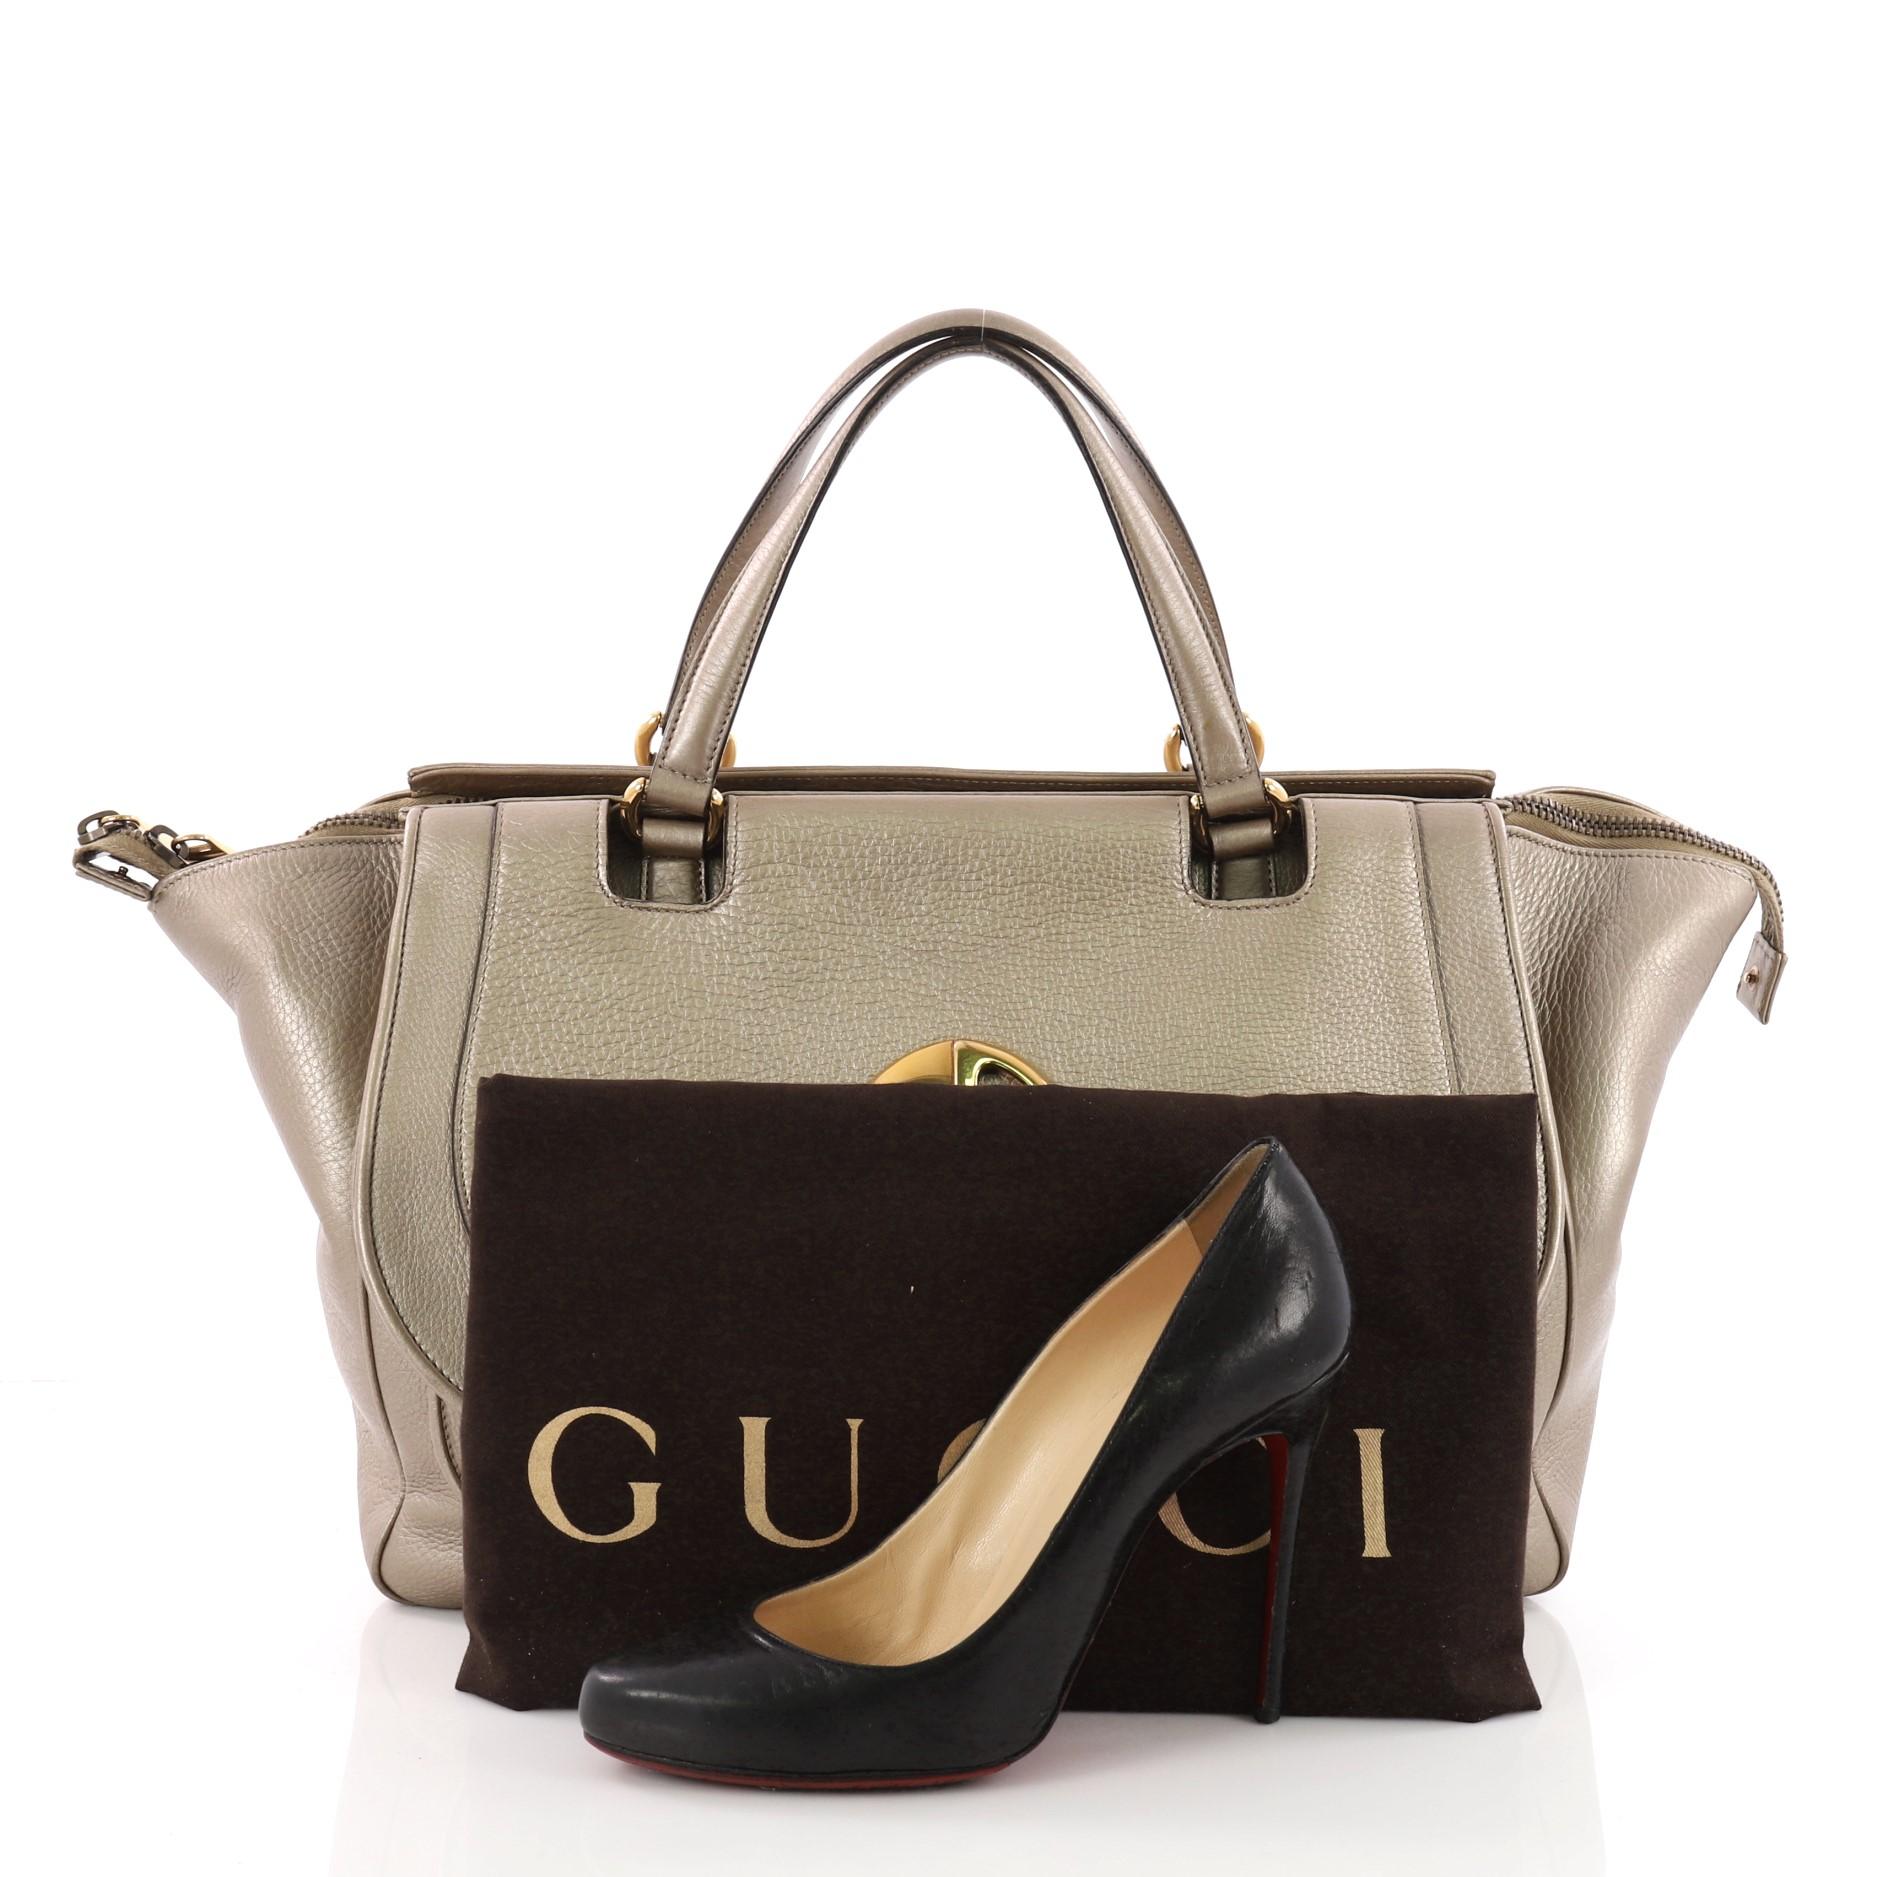 This authentic Gucci 1973 Top Handle Bag Leather Medium inspired by its 1973 classic design mixes a casual design with a modern twist. Crafted from metallic bronze leather, this bag features dual flat leather handles, vintage-style GG logo on the